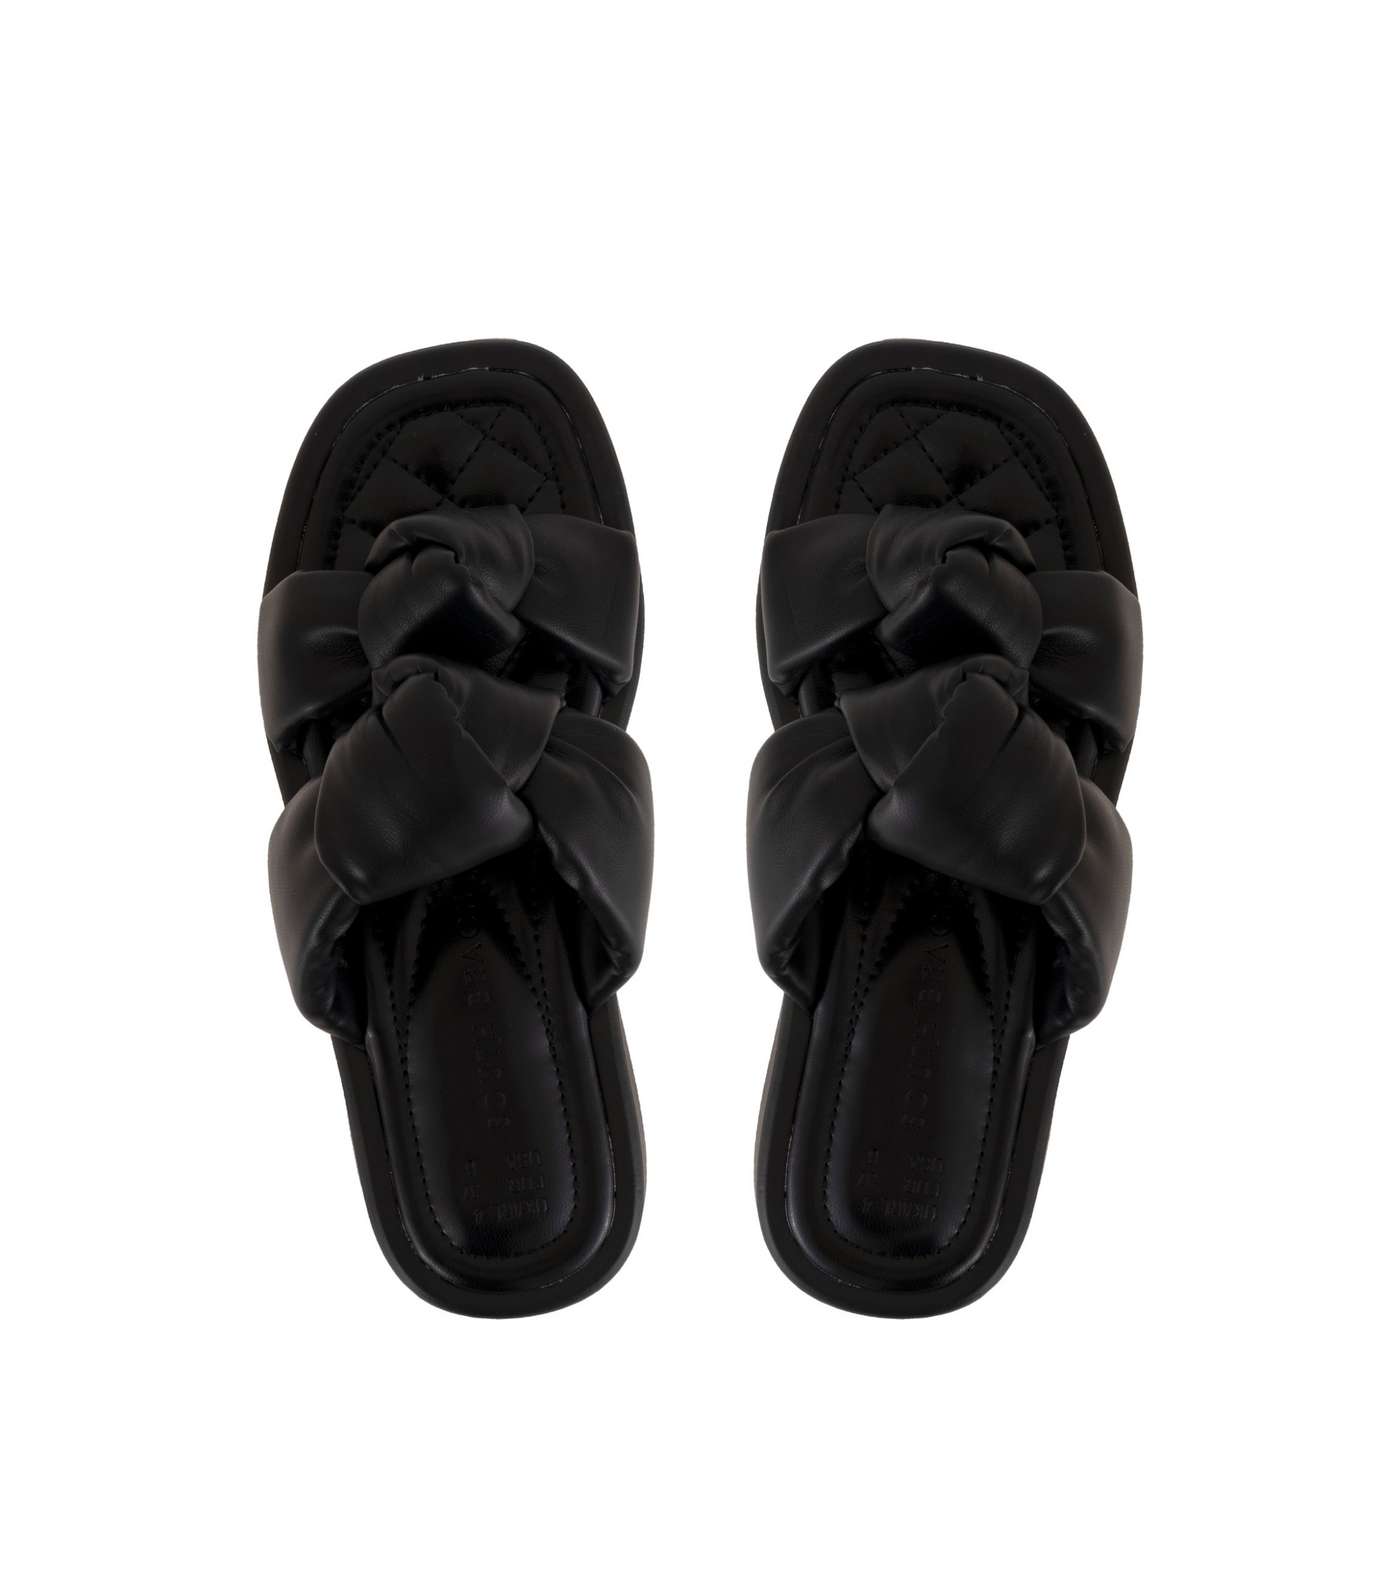 South Beach Black Double Knot Chunky Sliders Image 2